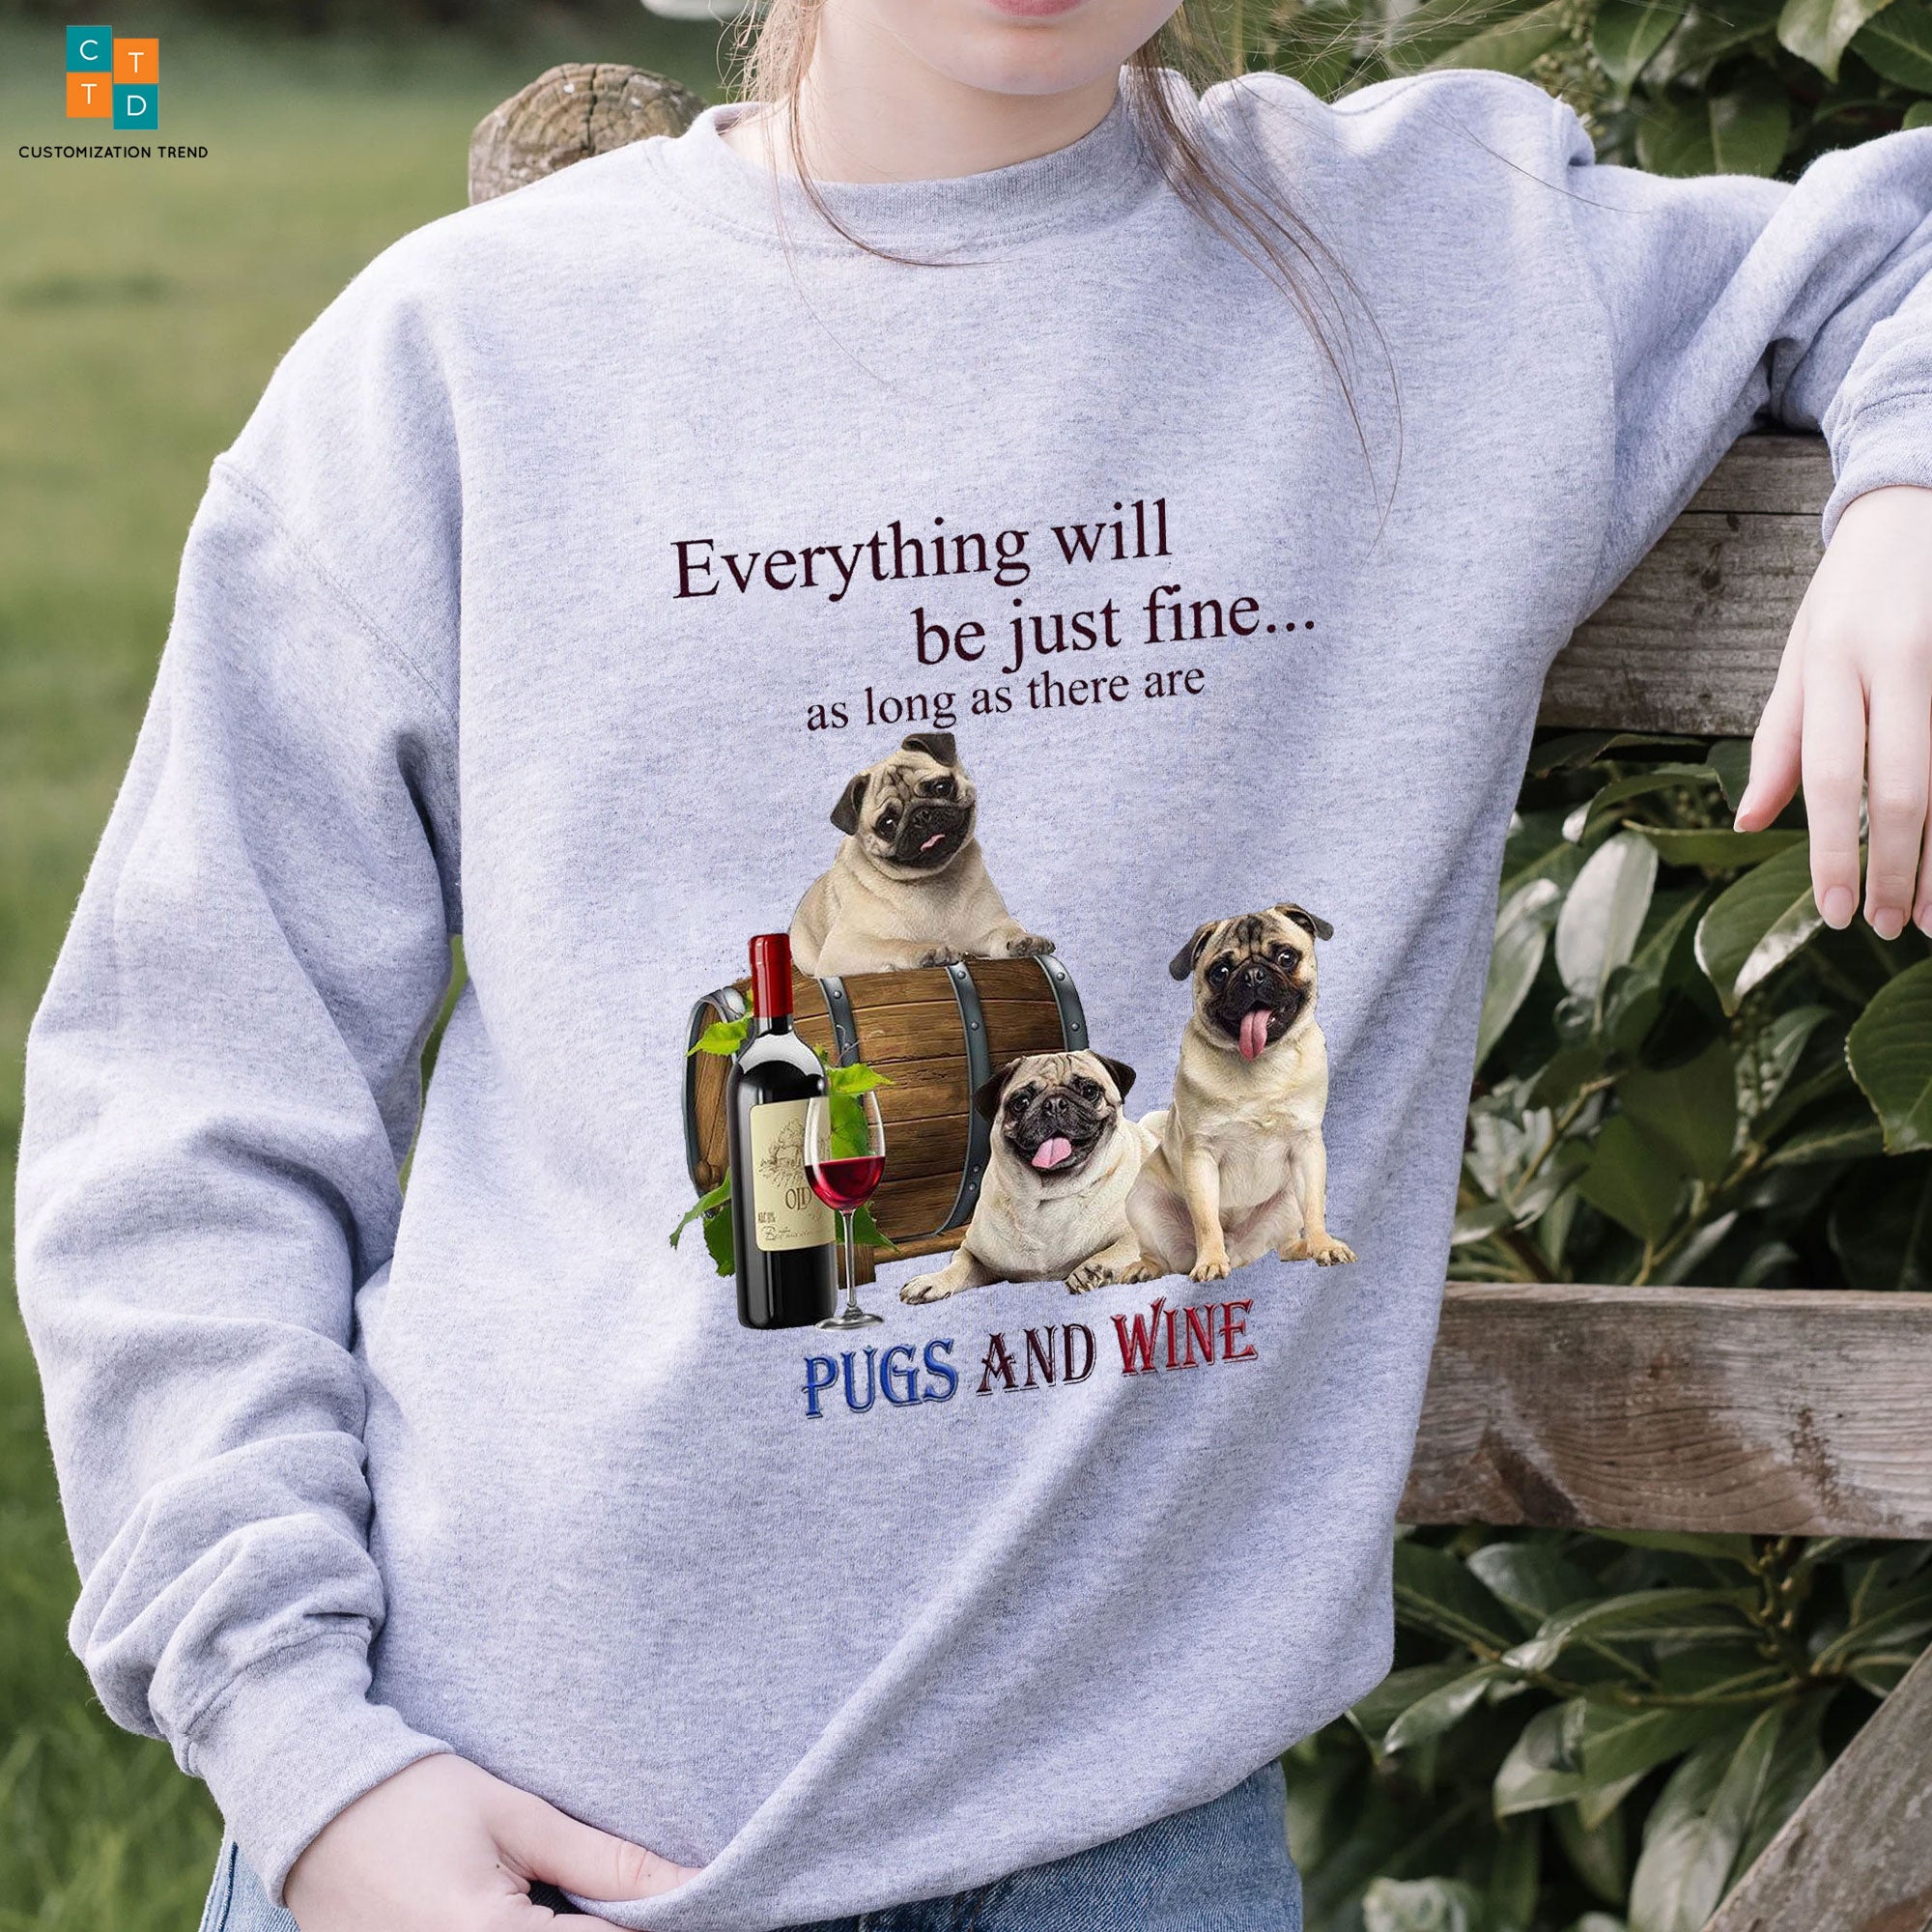 Everything Will Be Just Fine As Long As There Are Pugs And Wine Hoodie, Shirt